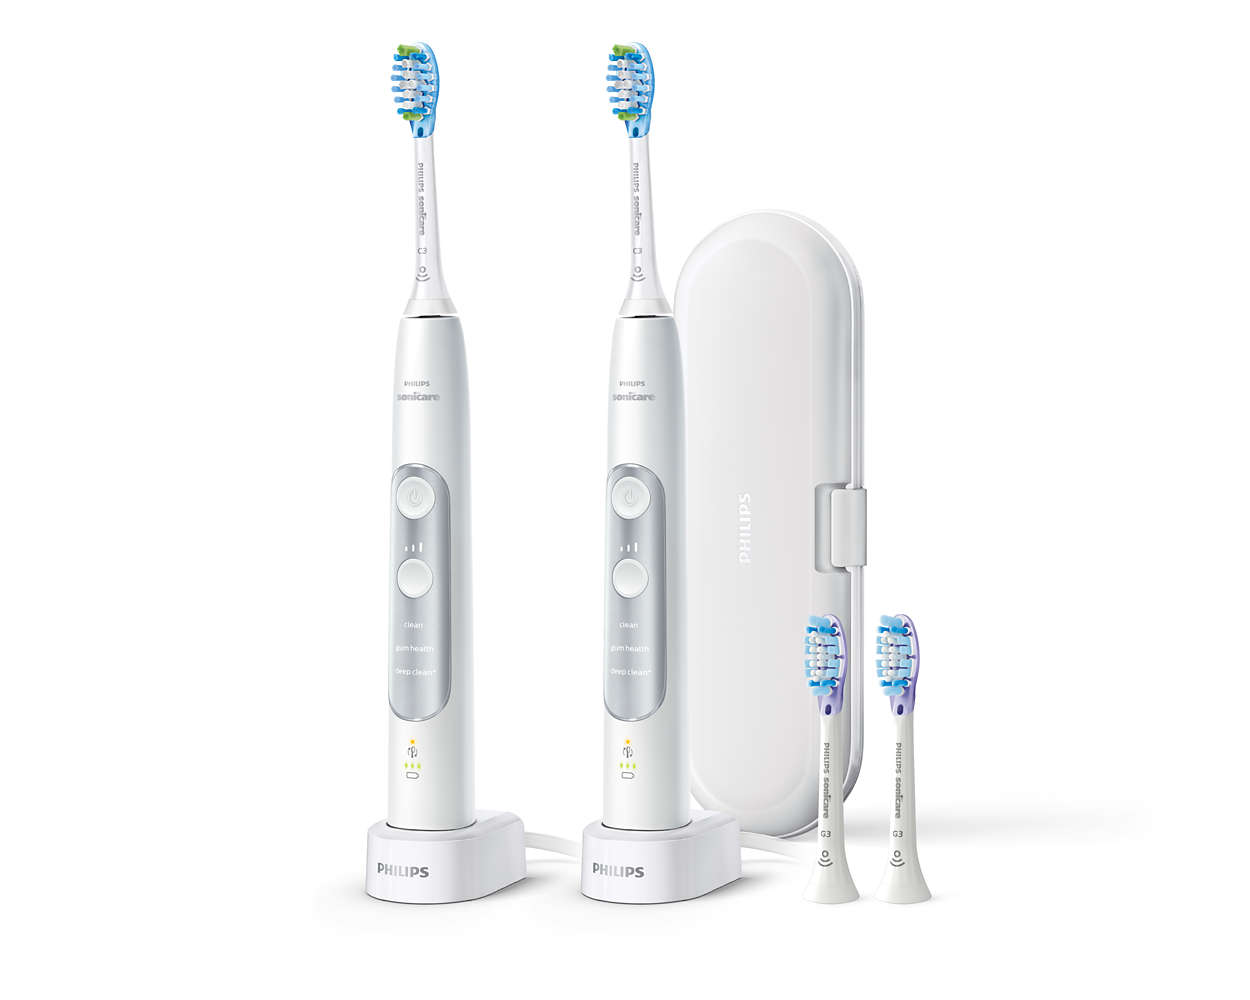 Everything you need for great oral health